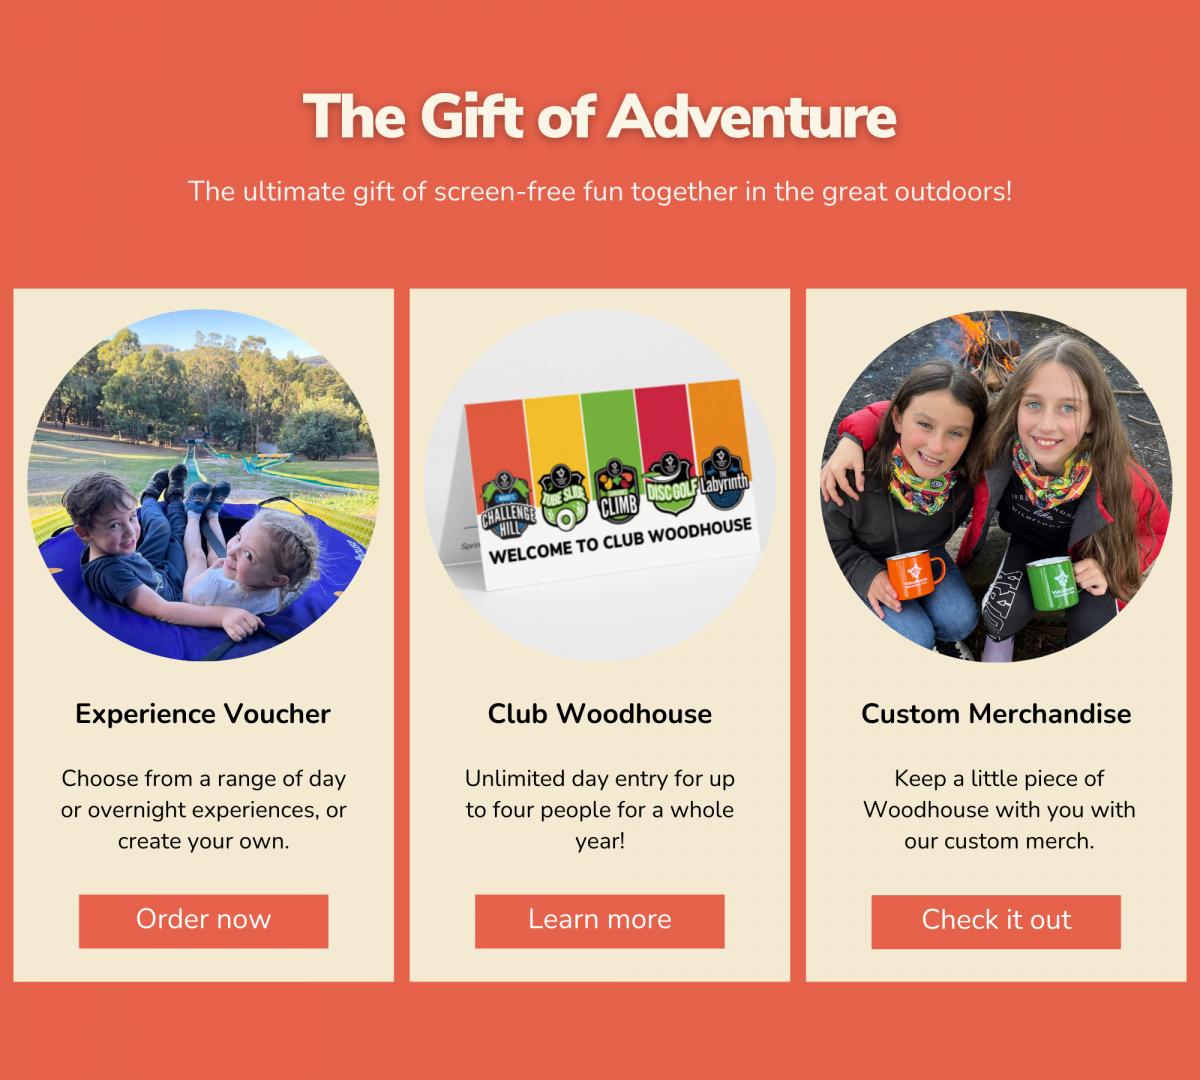 The gift of adventure